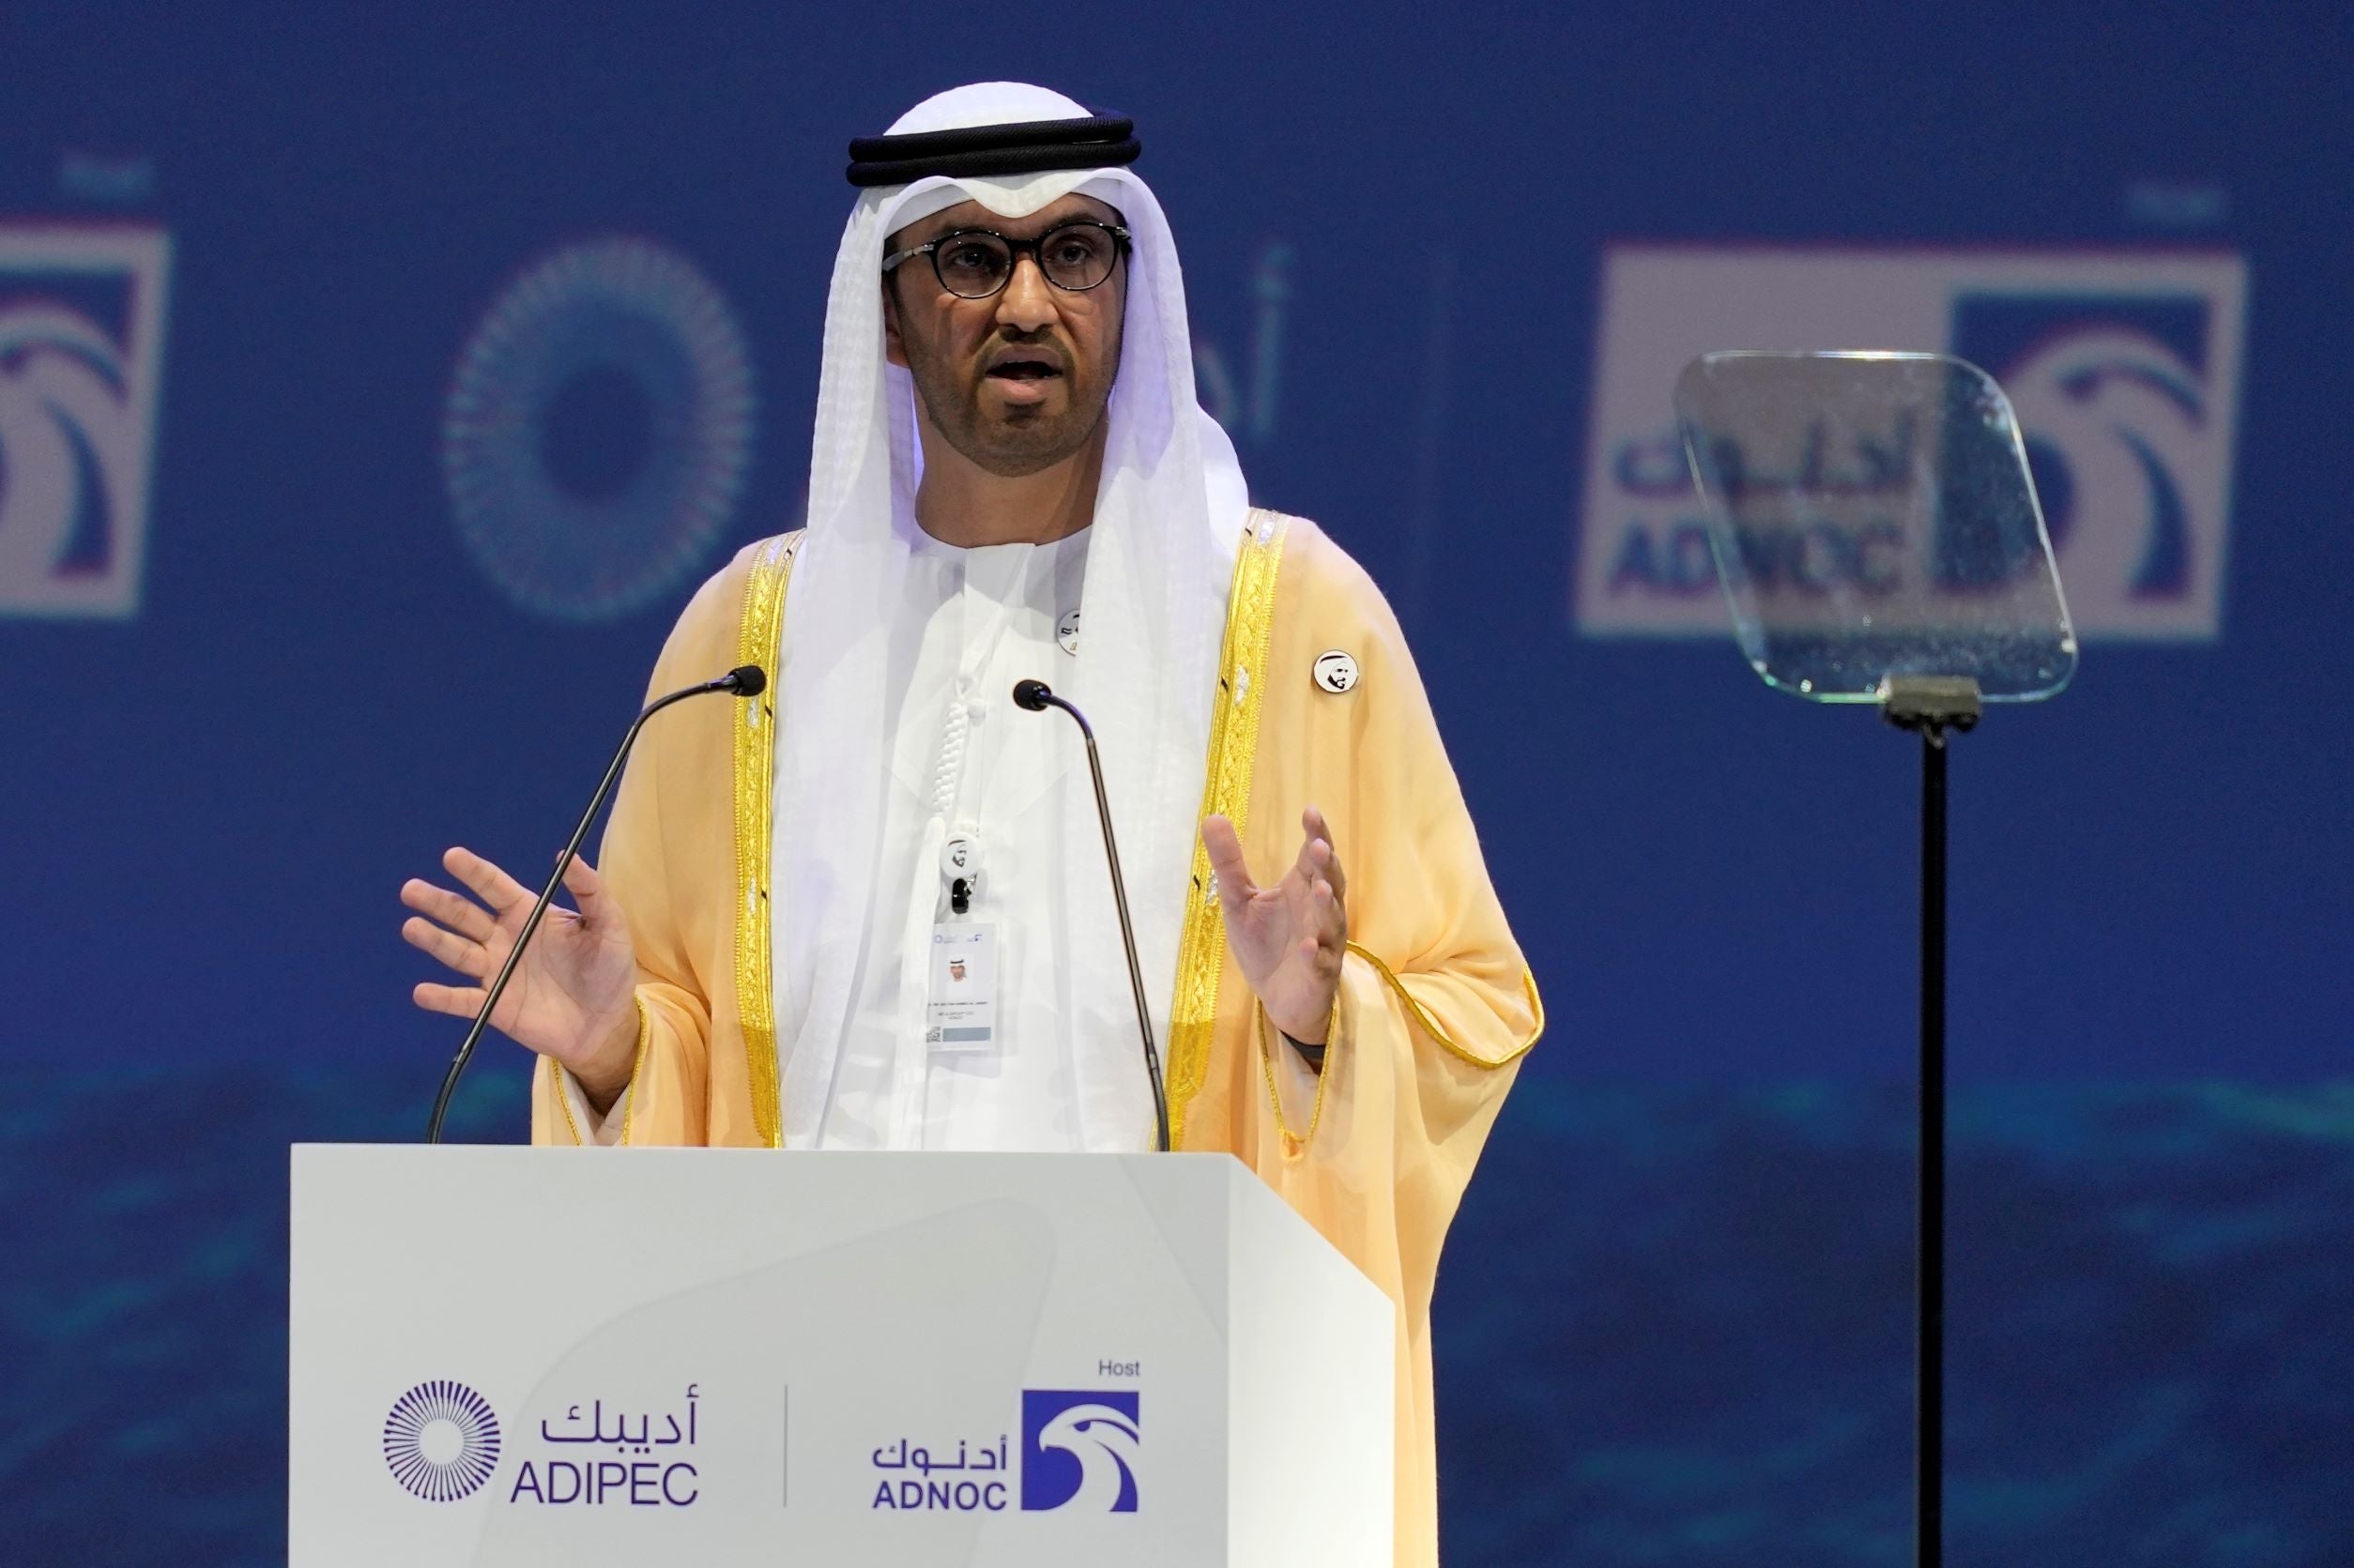 UAE Minister of State and CEO of the Abu Dhabi National Oil Co. Sultan Ahmed al-Jaber talks during the Abu Dhabi Sustainability Week's opening ceremony, in Abu Dhabi, United Arab Emirates, January 16, 2023. 